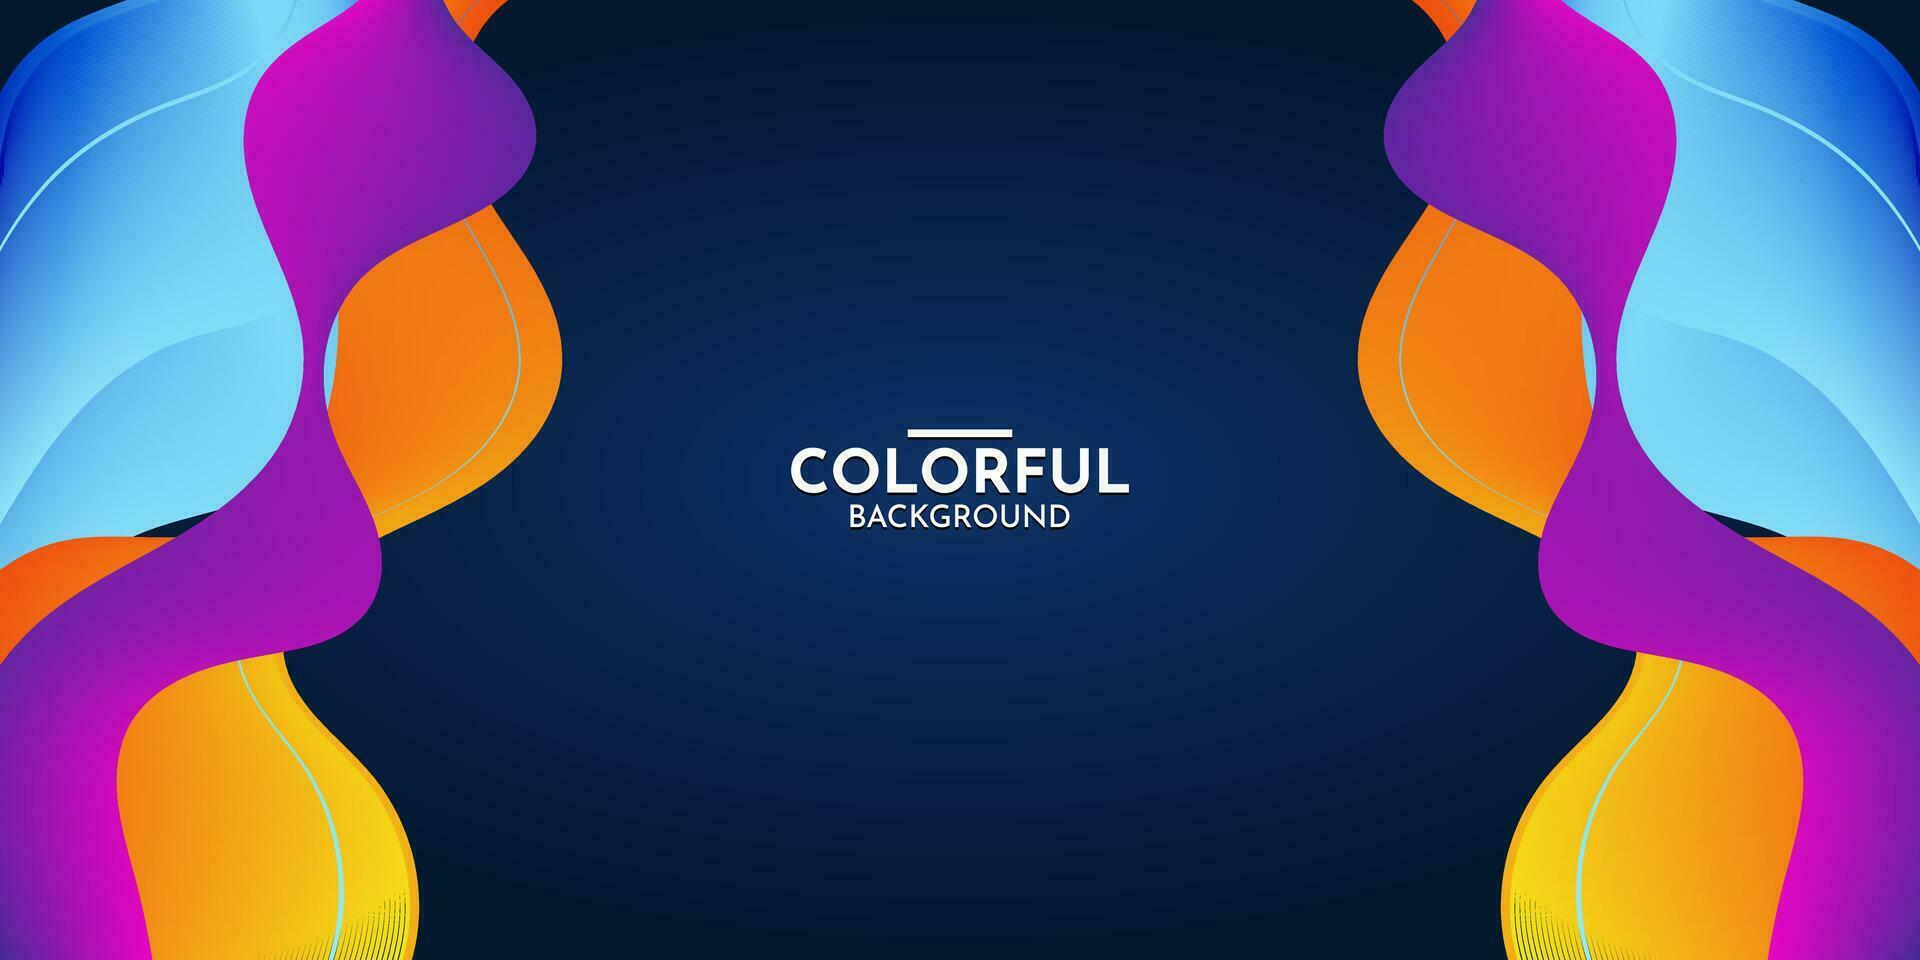 Colorful flowing wave background with modern abstract shapes. Very suitable for poster, banner, cover, advertisement, wallpaper, etc. vector